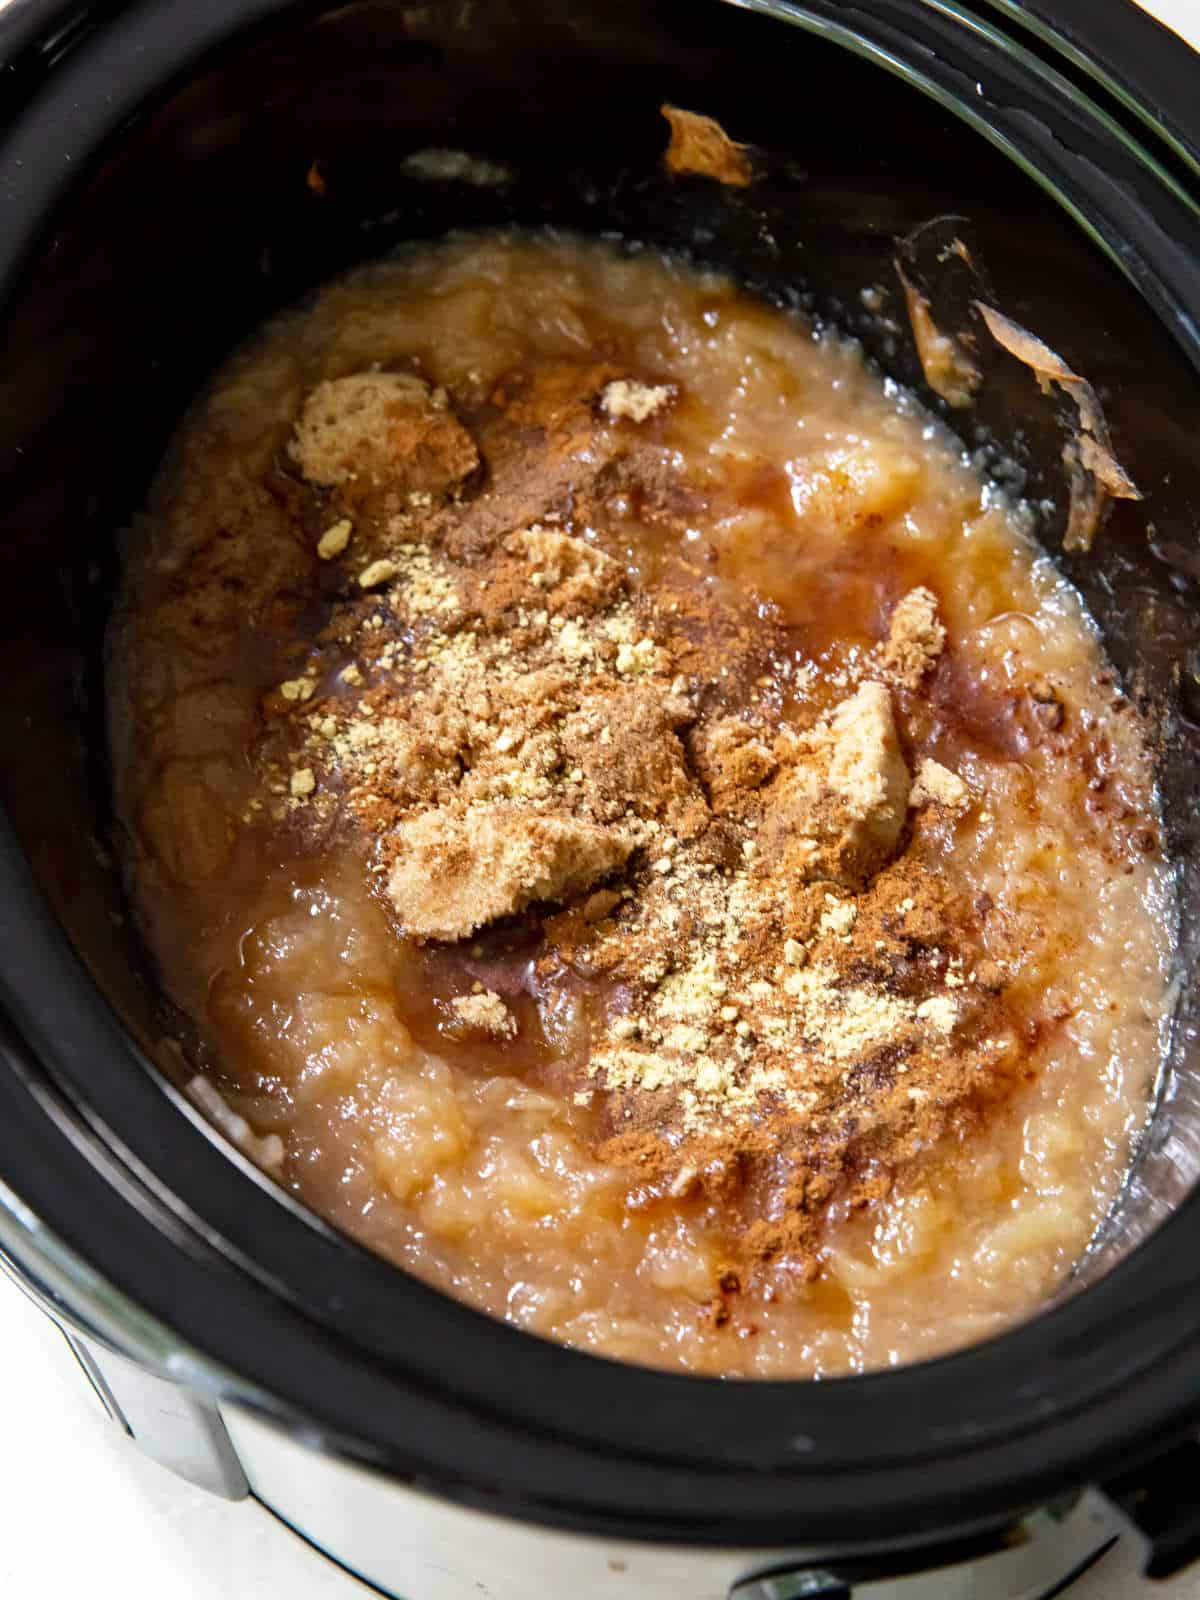 spices added to unsweetened applesauce in a crockpot.